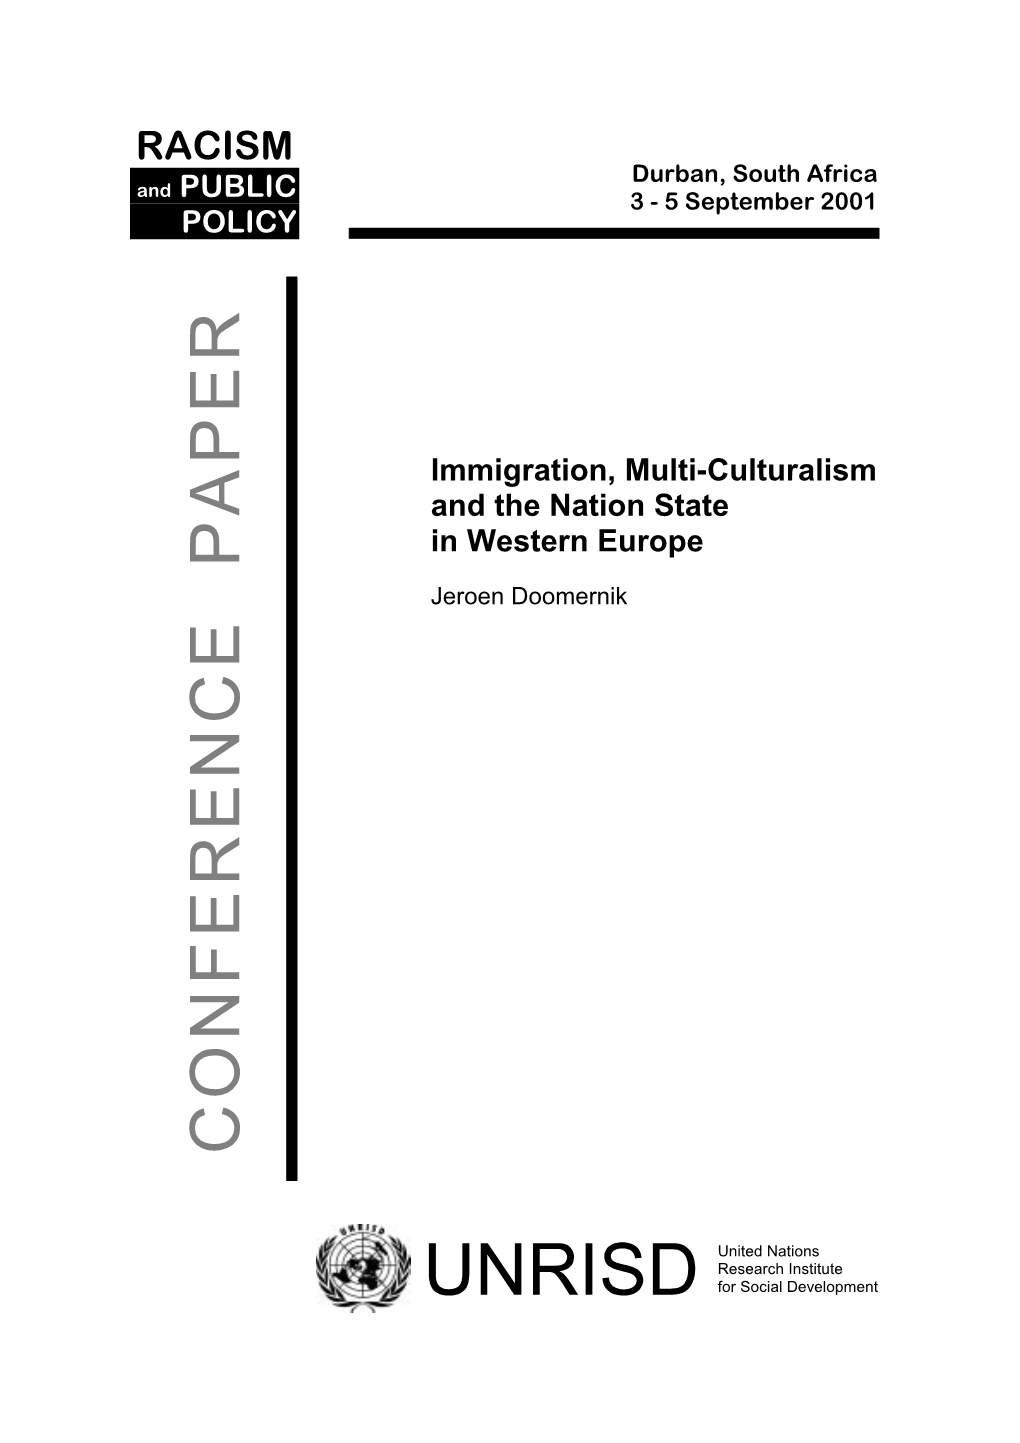 Immigration, Multi-Culturalism and the Nation State in Western Europe